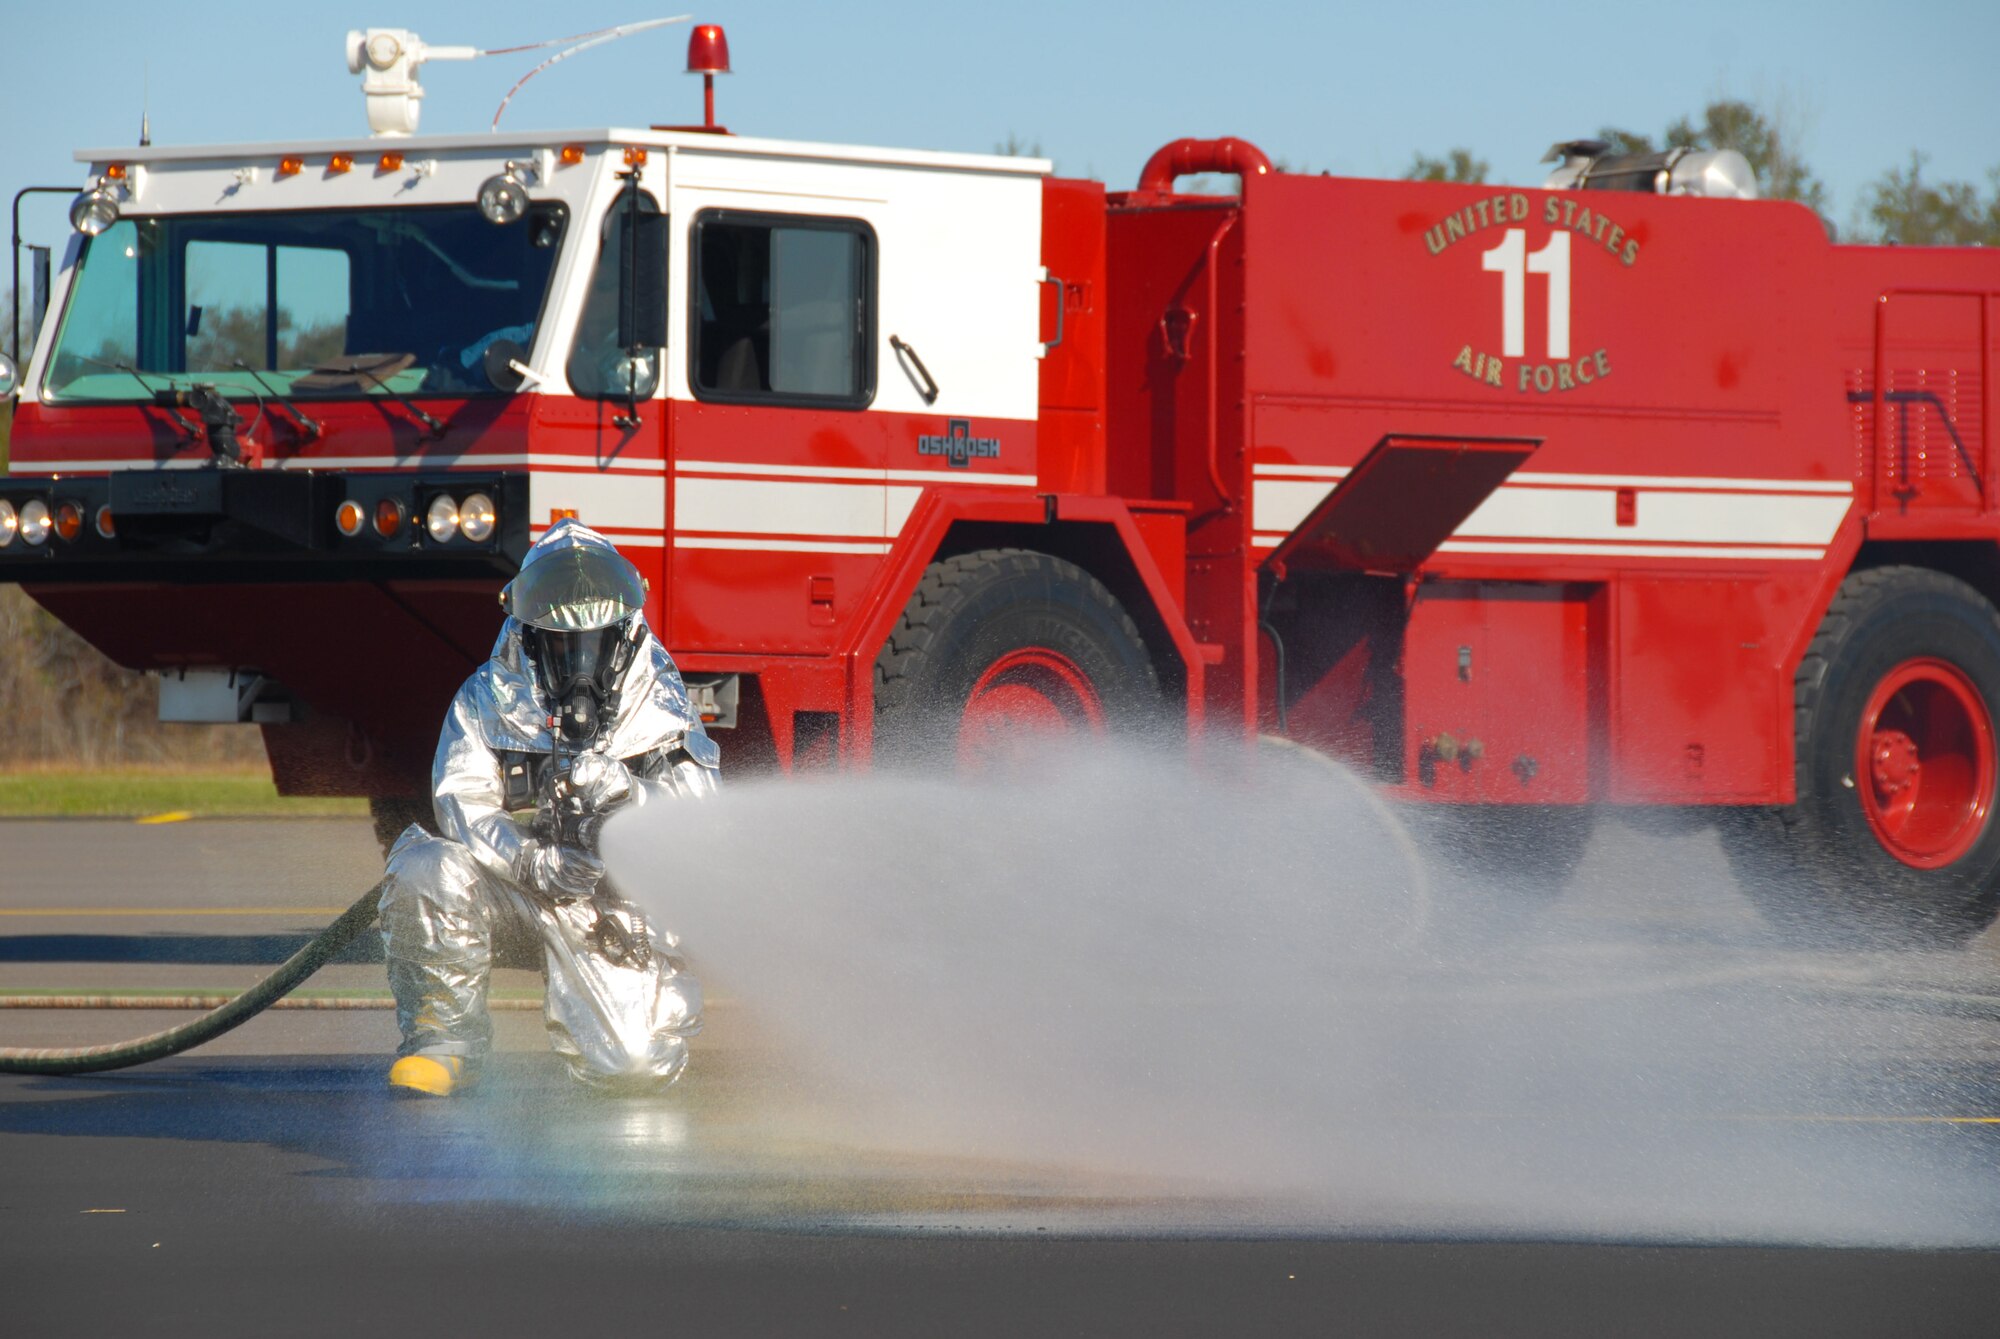 A Maxwell firefighter hoses down the runway at the Prattville airport. (U.S. Air Force photo/Jamie Pitcher)